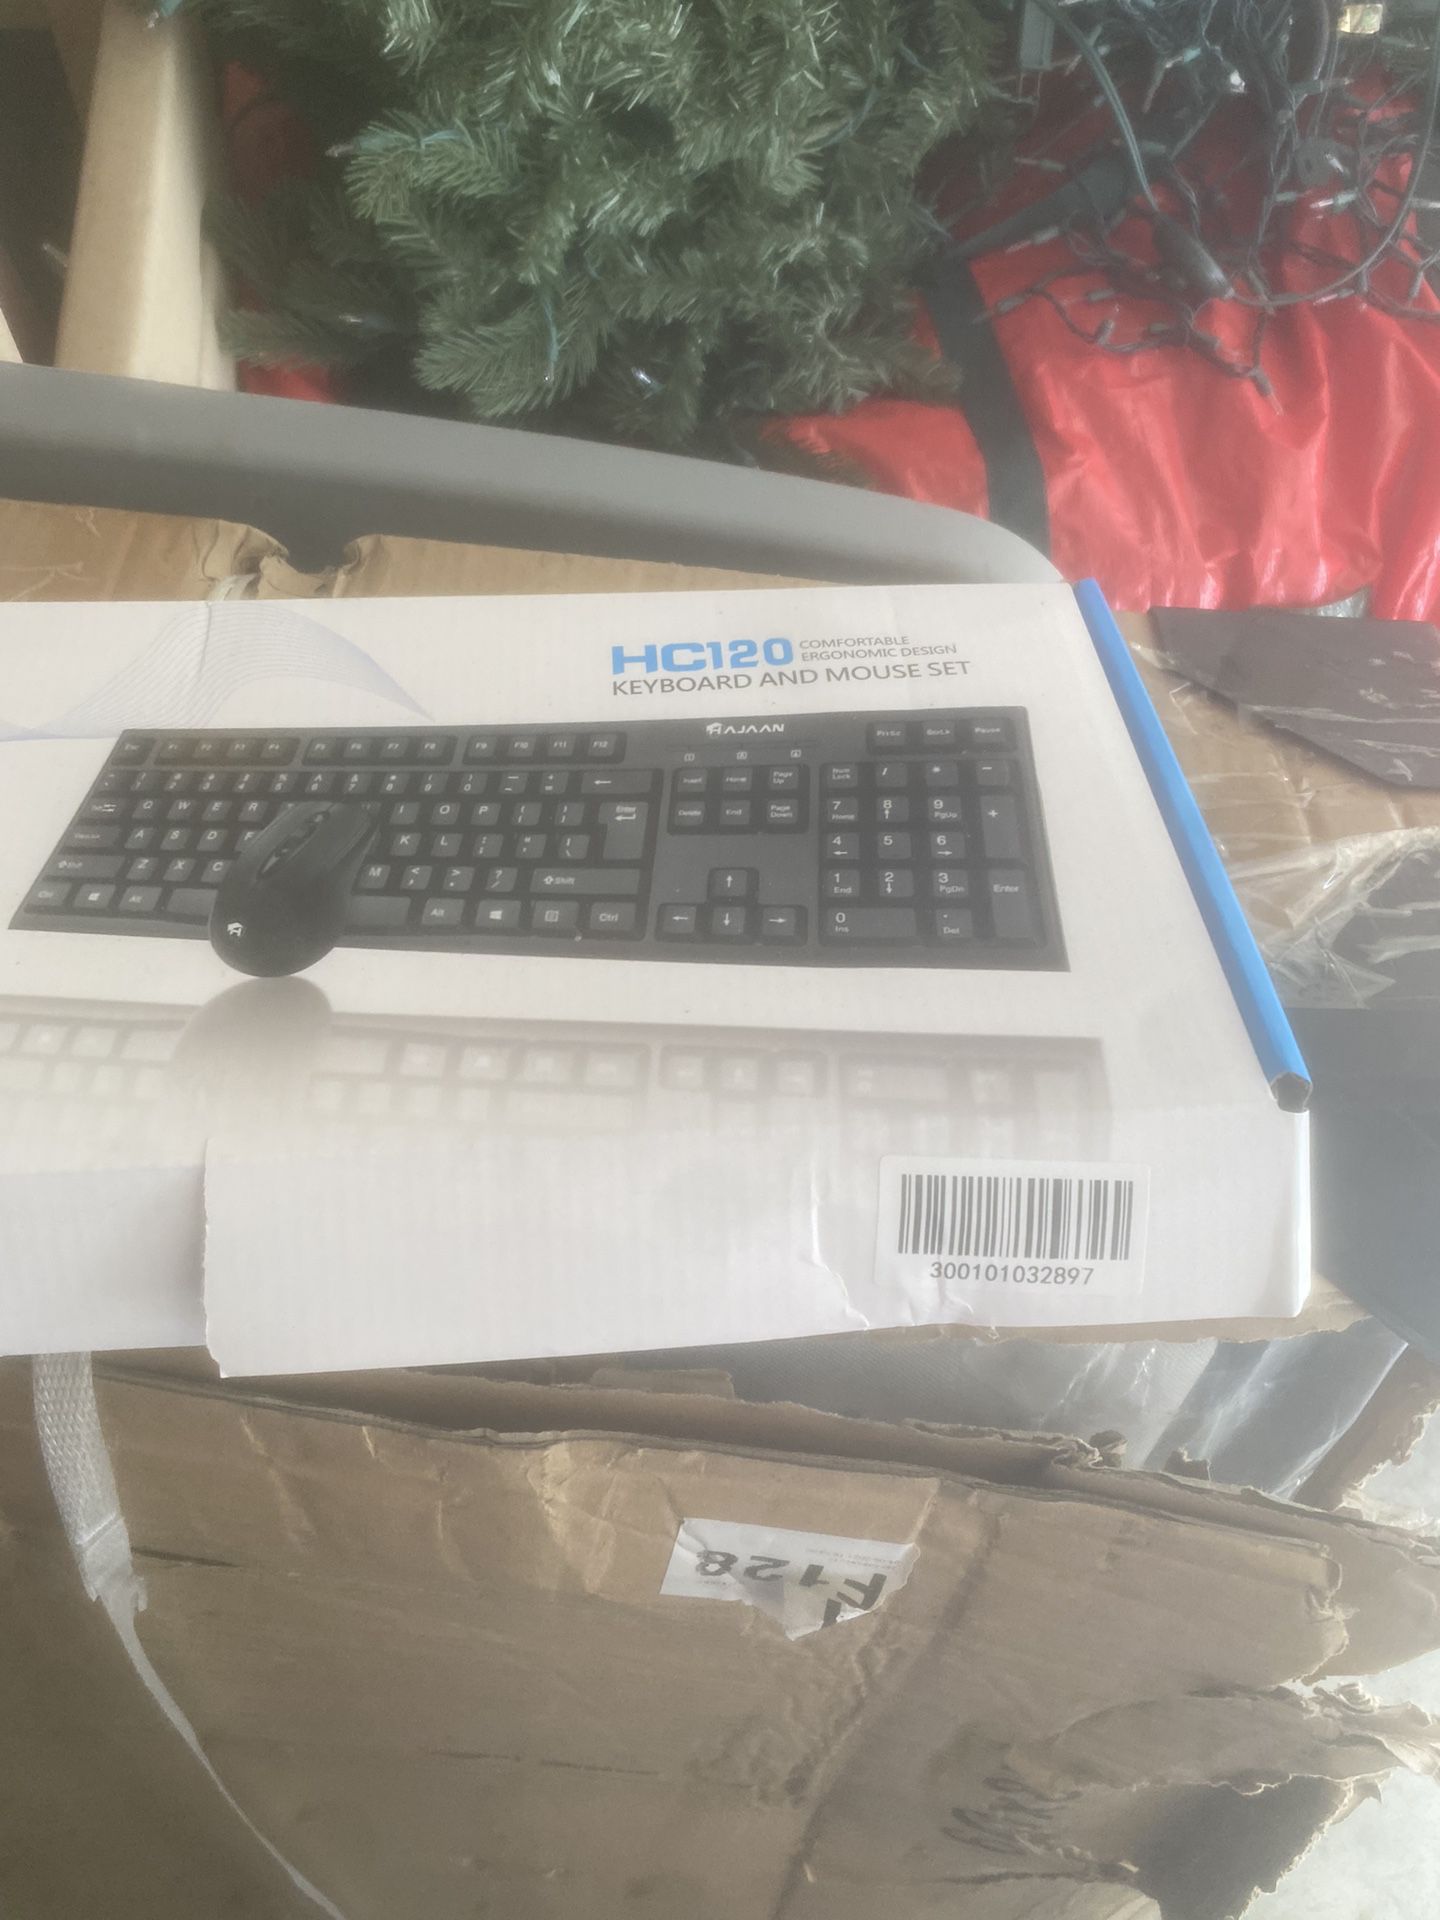 Hajaan Wireless Keyboard And Mouse Set